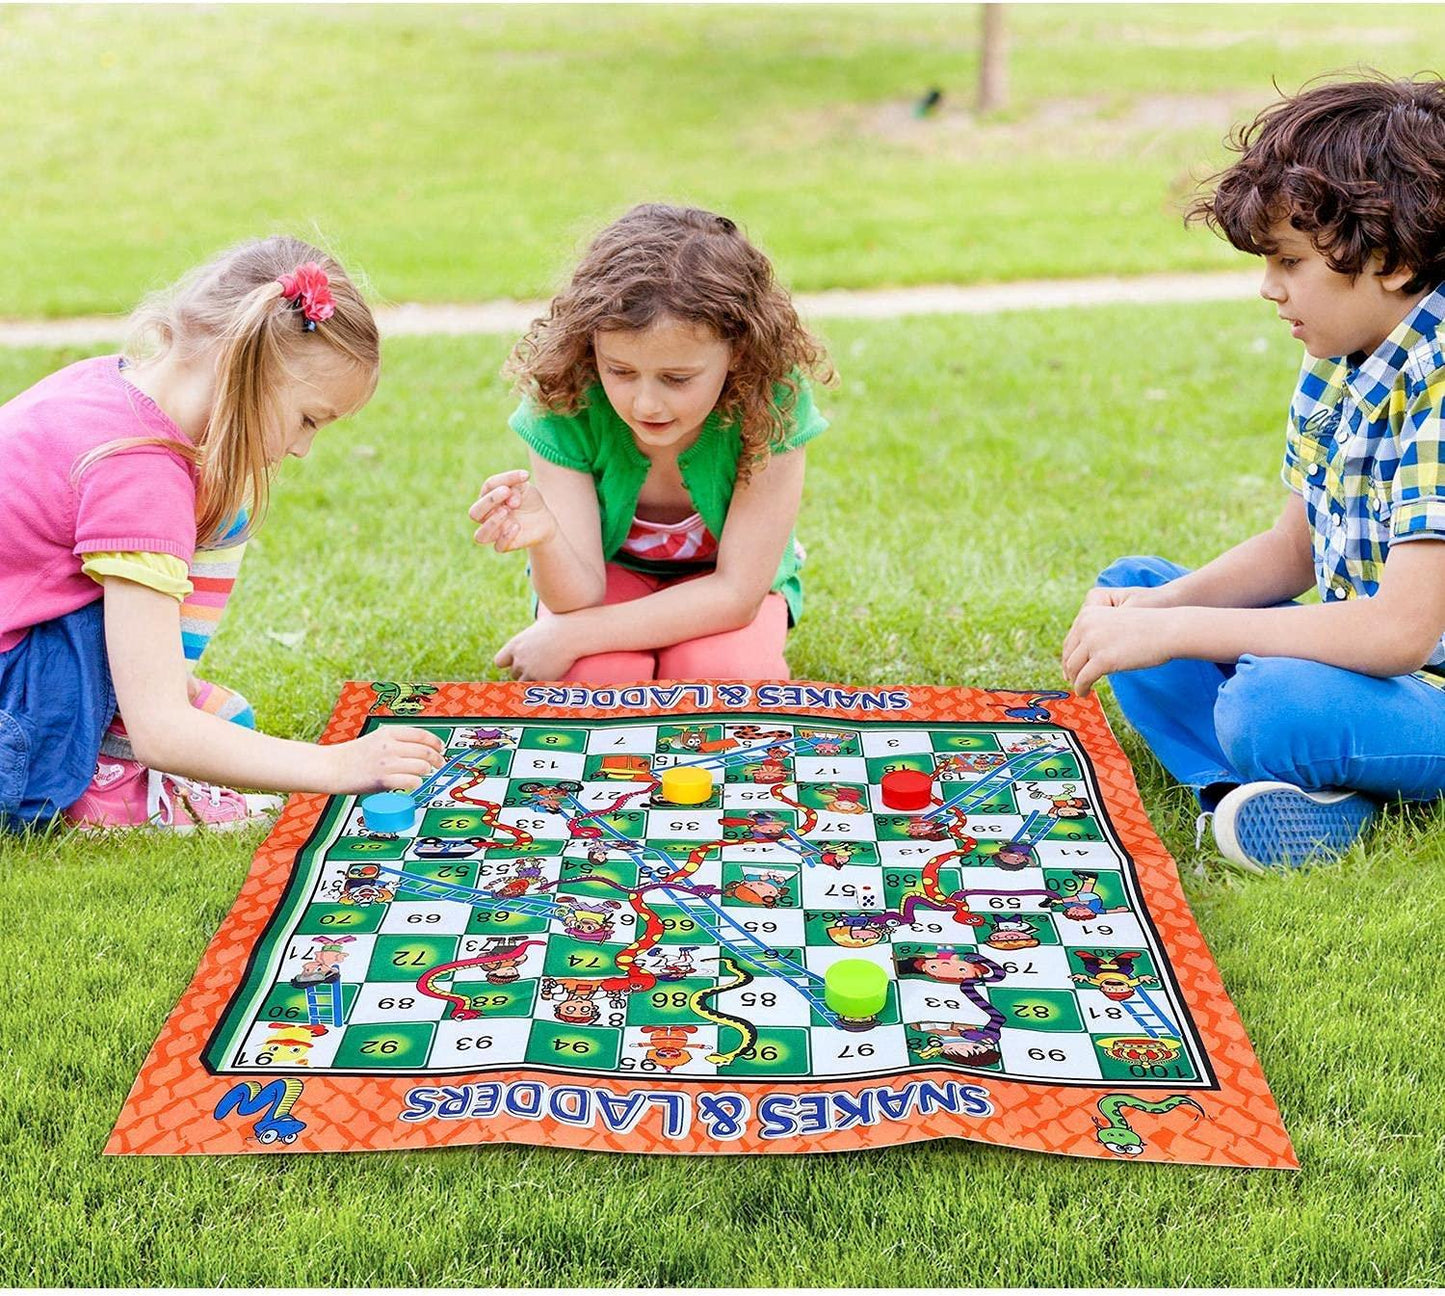 Giant Snakes & Ladder Ludo Chess Board Game Playmat Outdoor Fun - Home Inspired Gifts